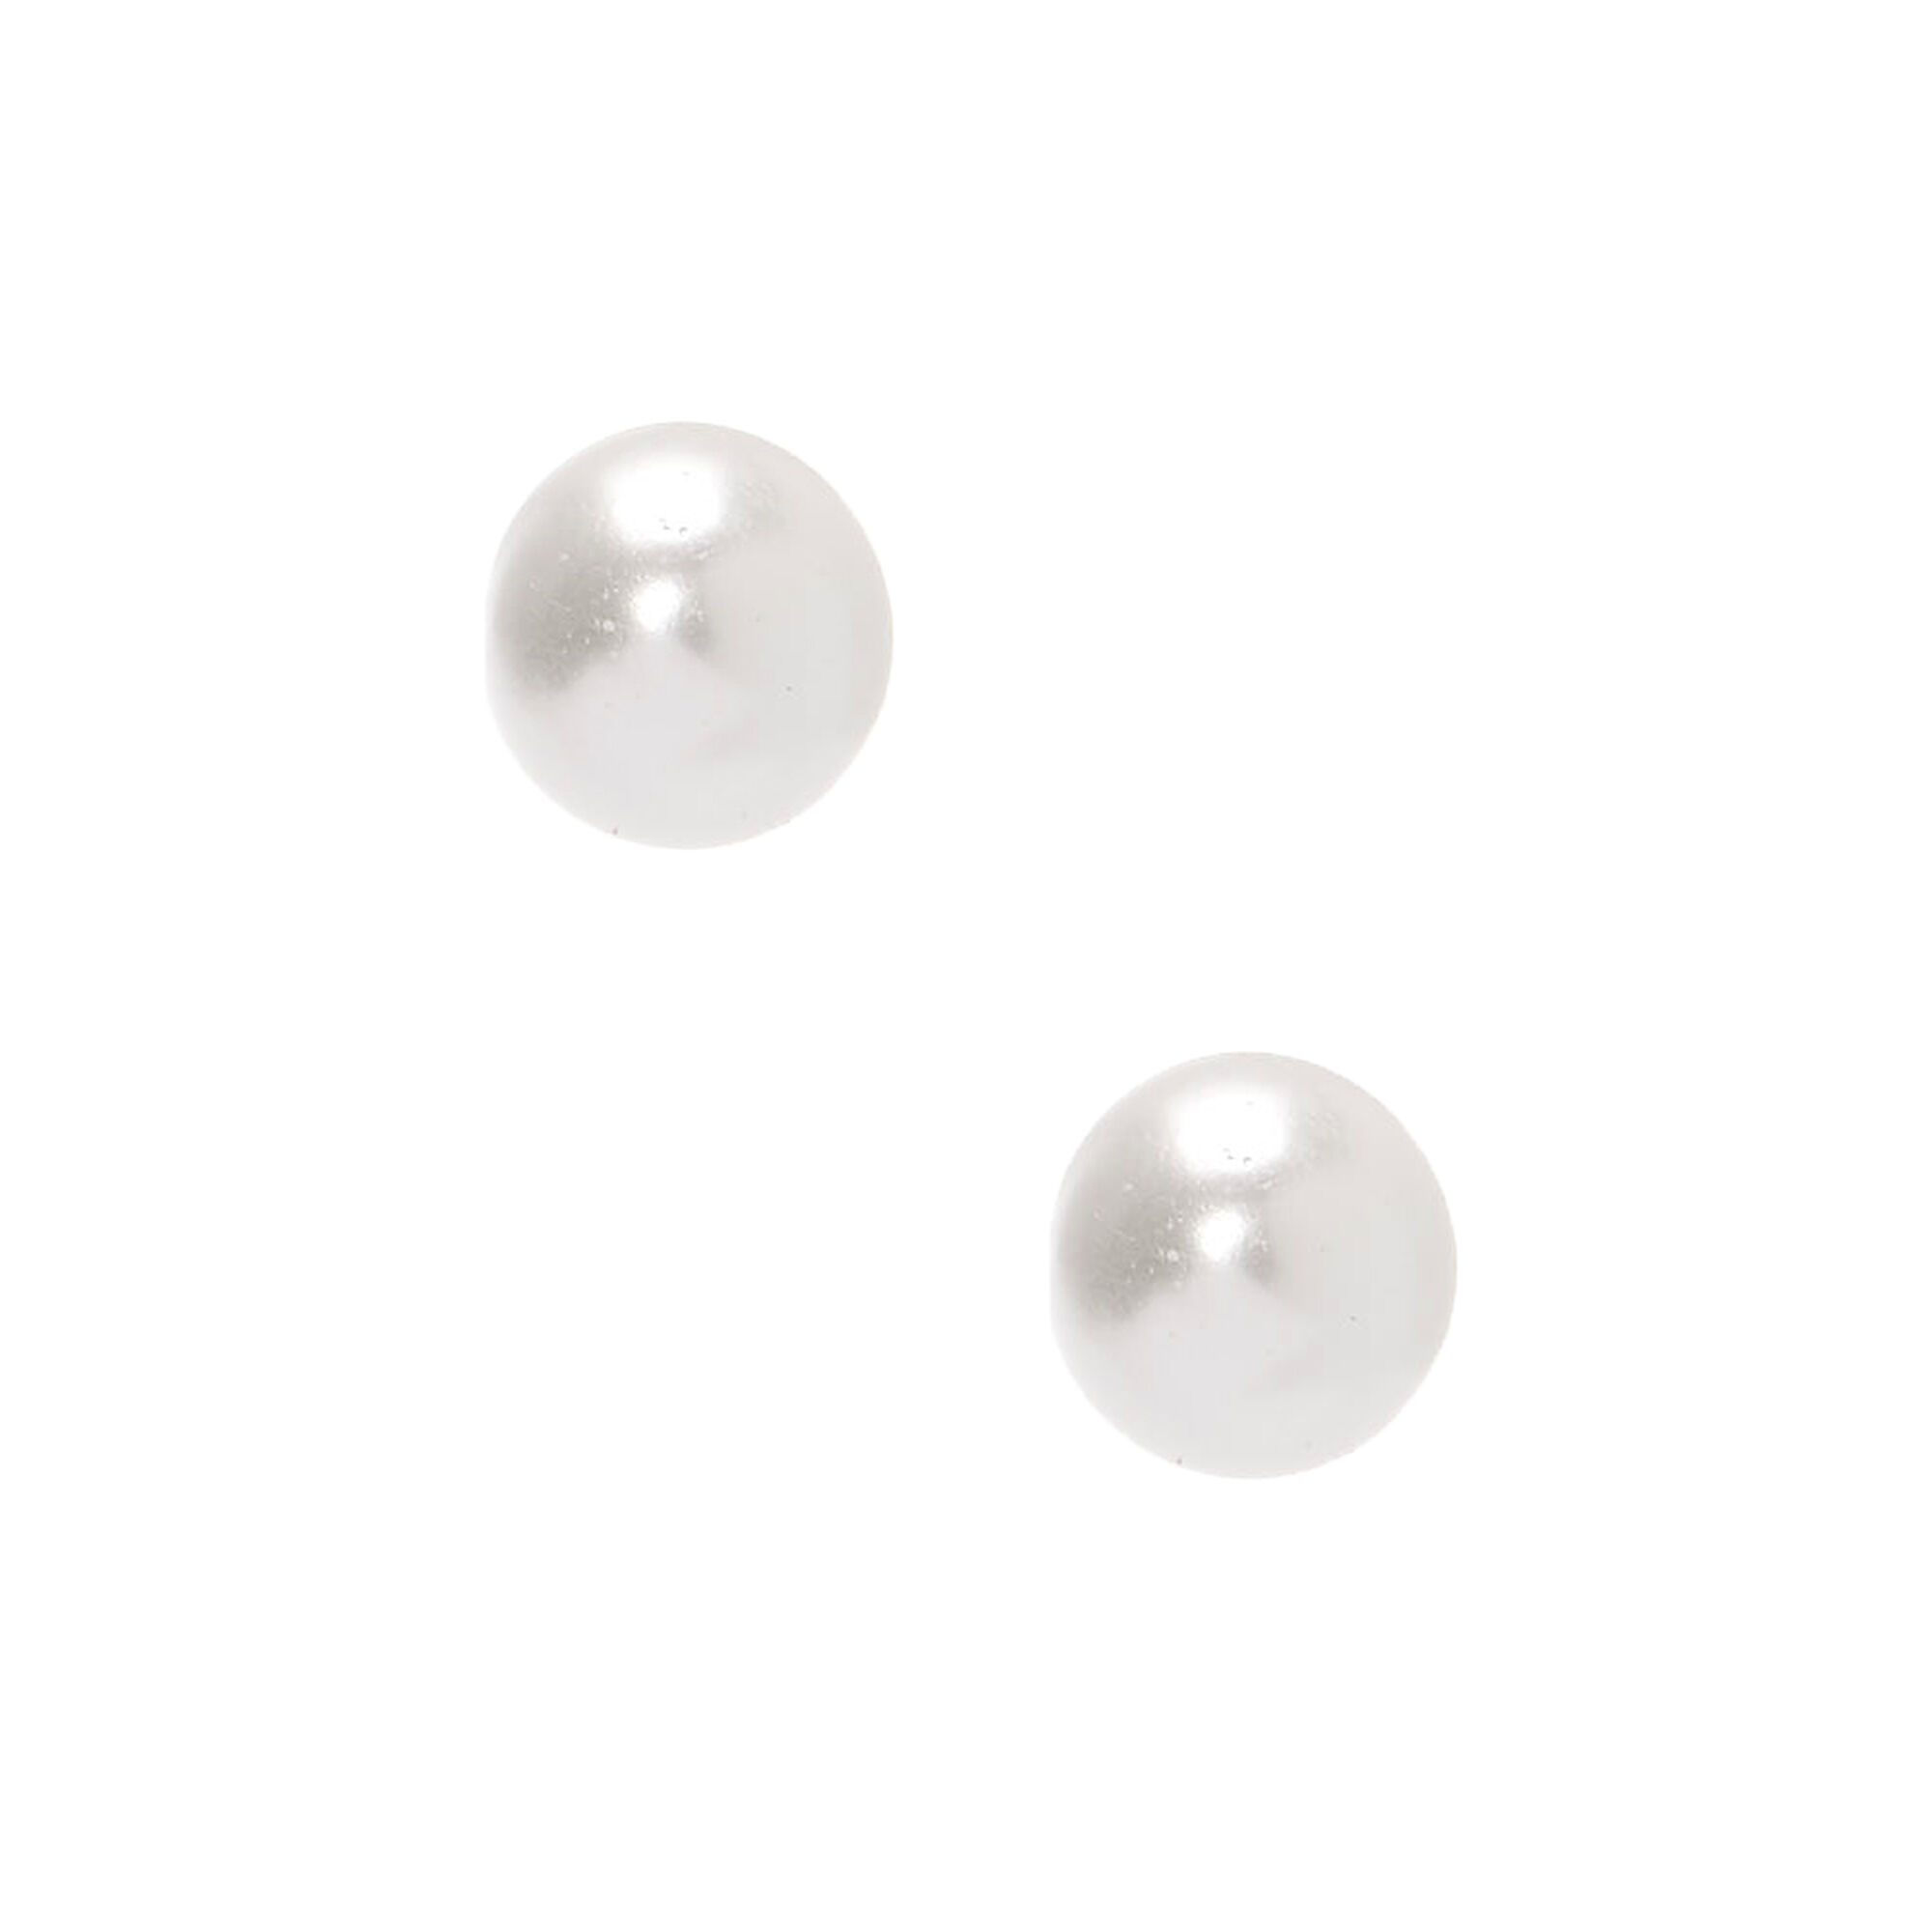 View C Luxe By Claires 4MM Glass Pearl Stud Earrings Silver information